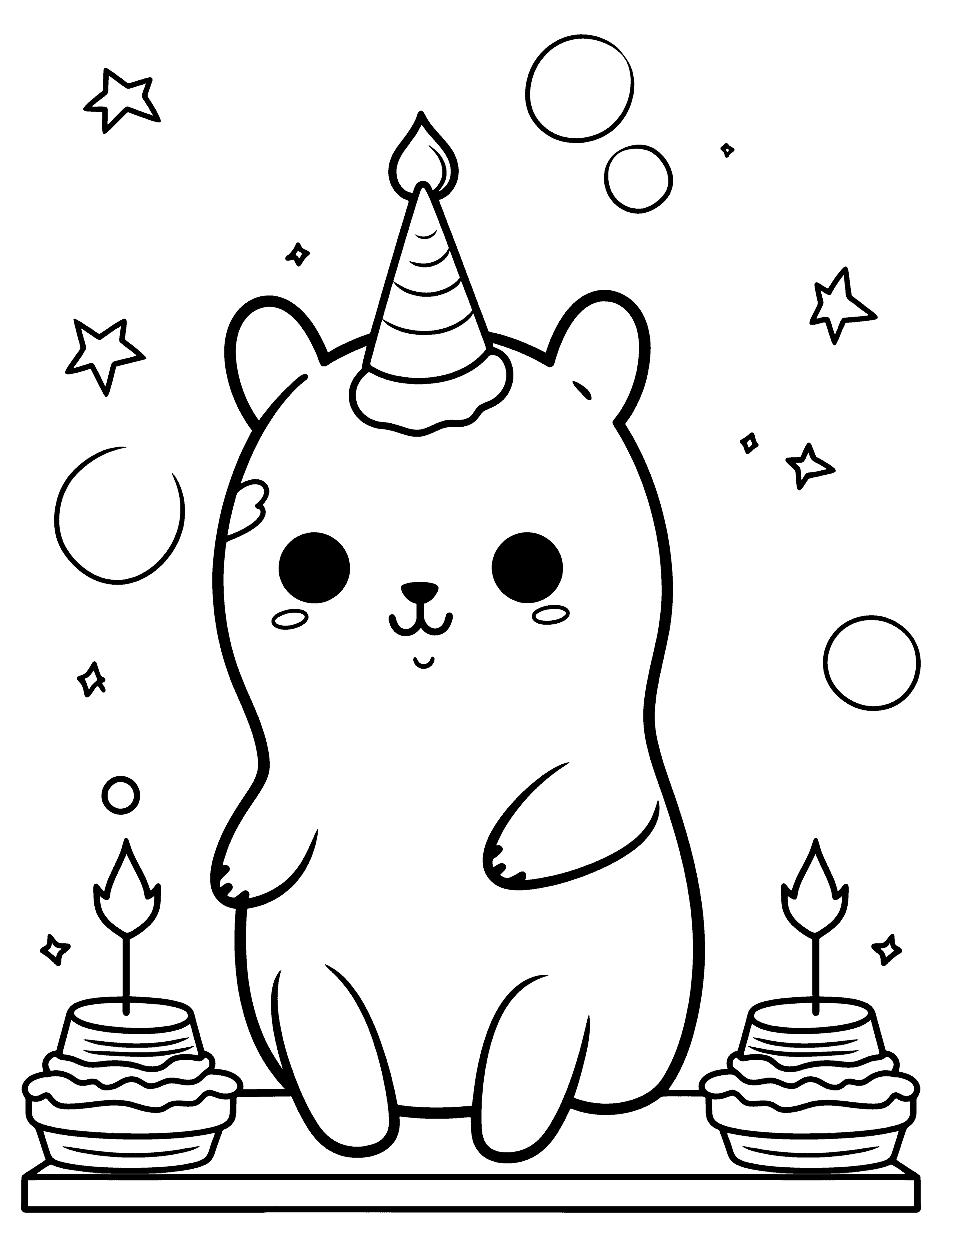 The Lovable Llama's Birthday Party Kawaii Coloring Page - A Kawaii llama celebrates its birthday with a fun party and two birthday cakes.